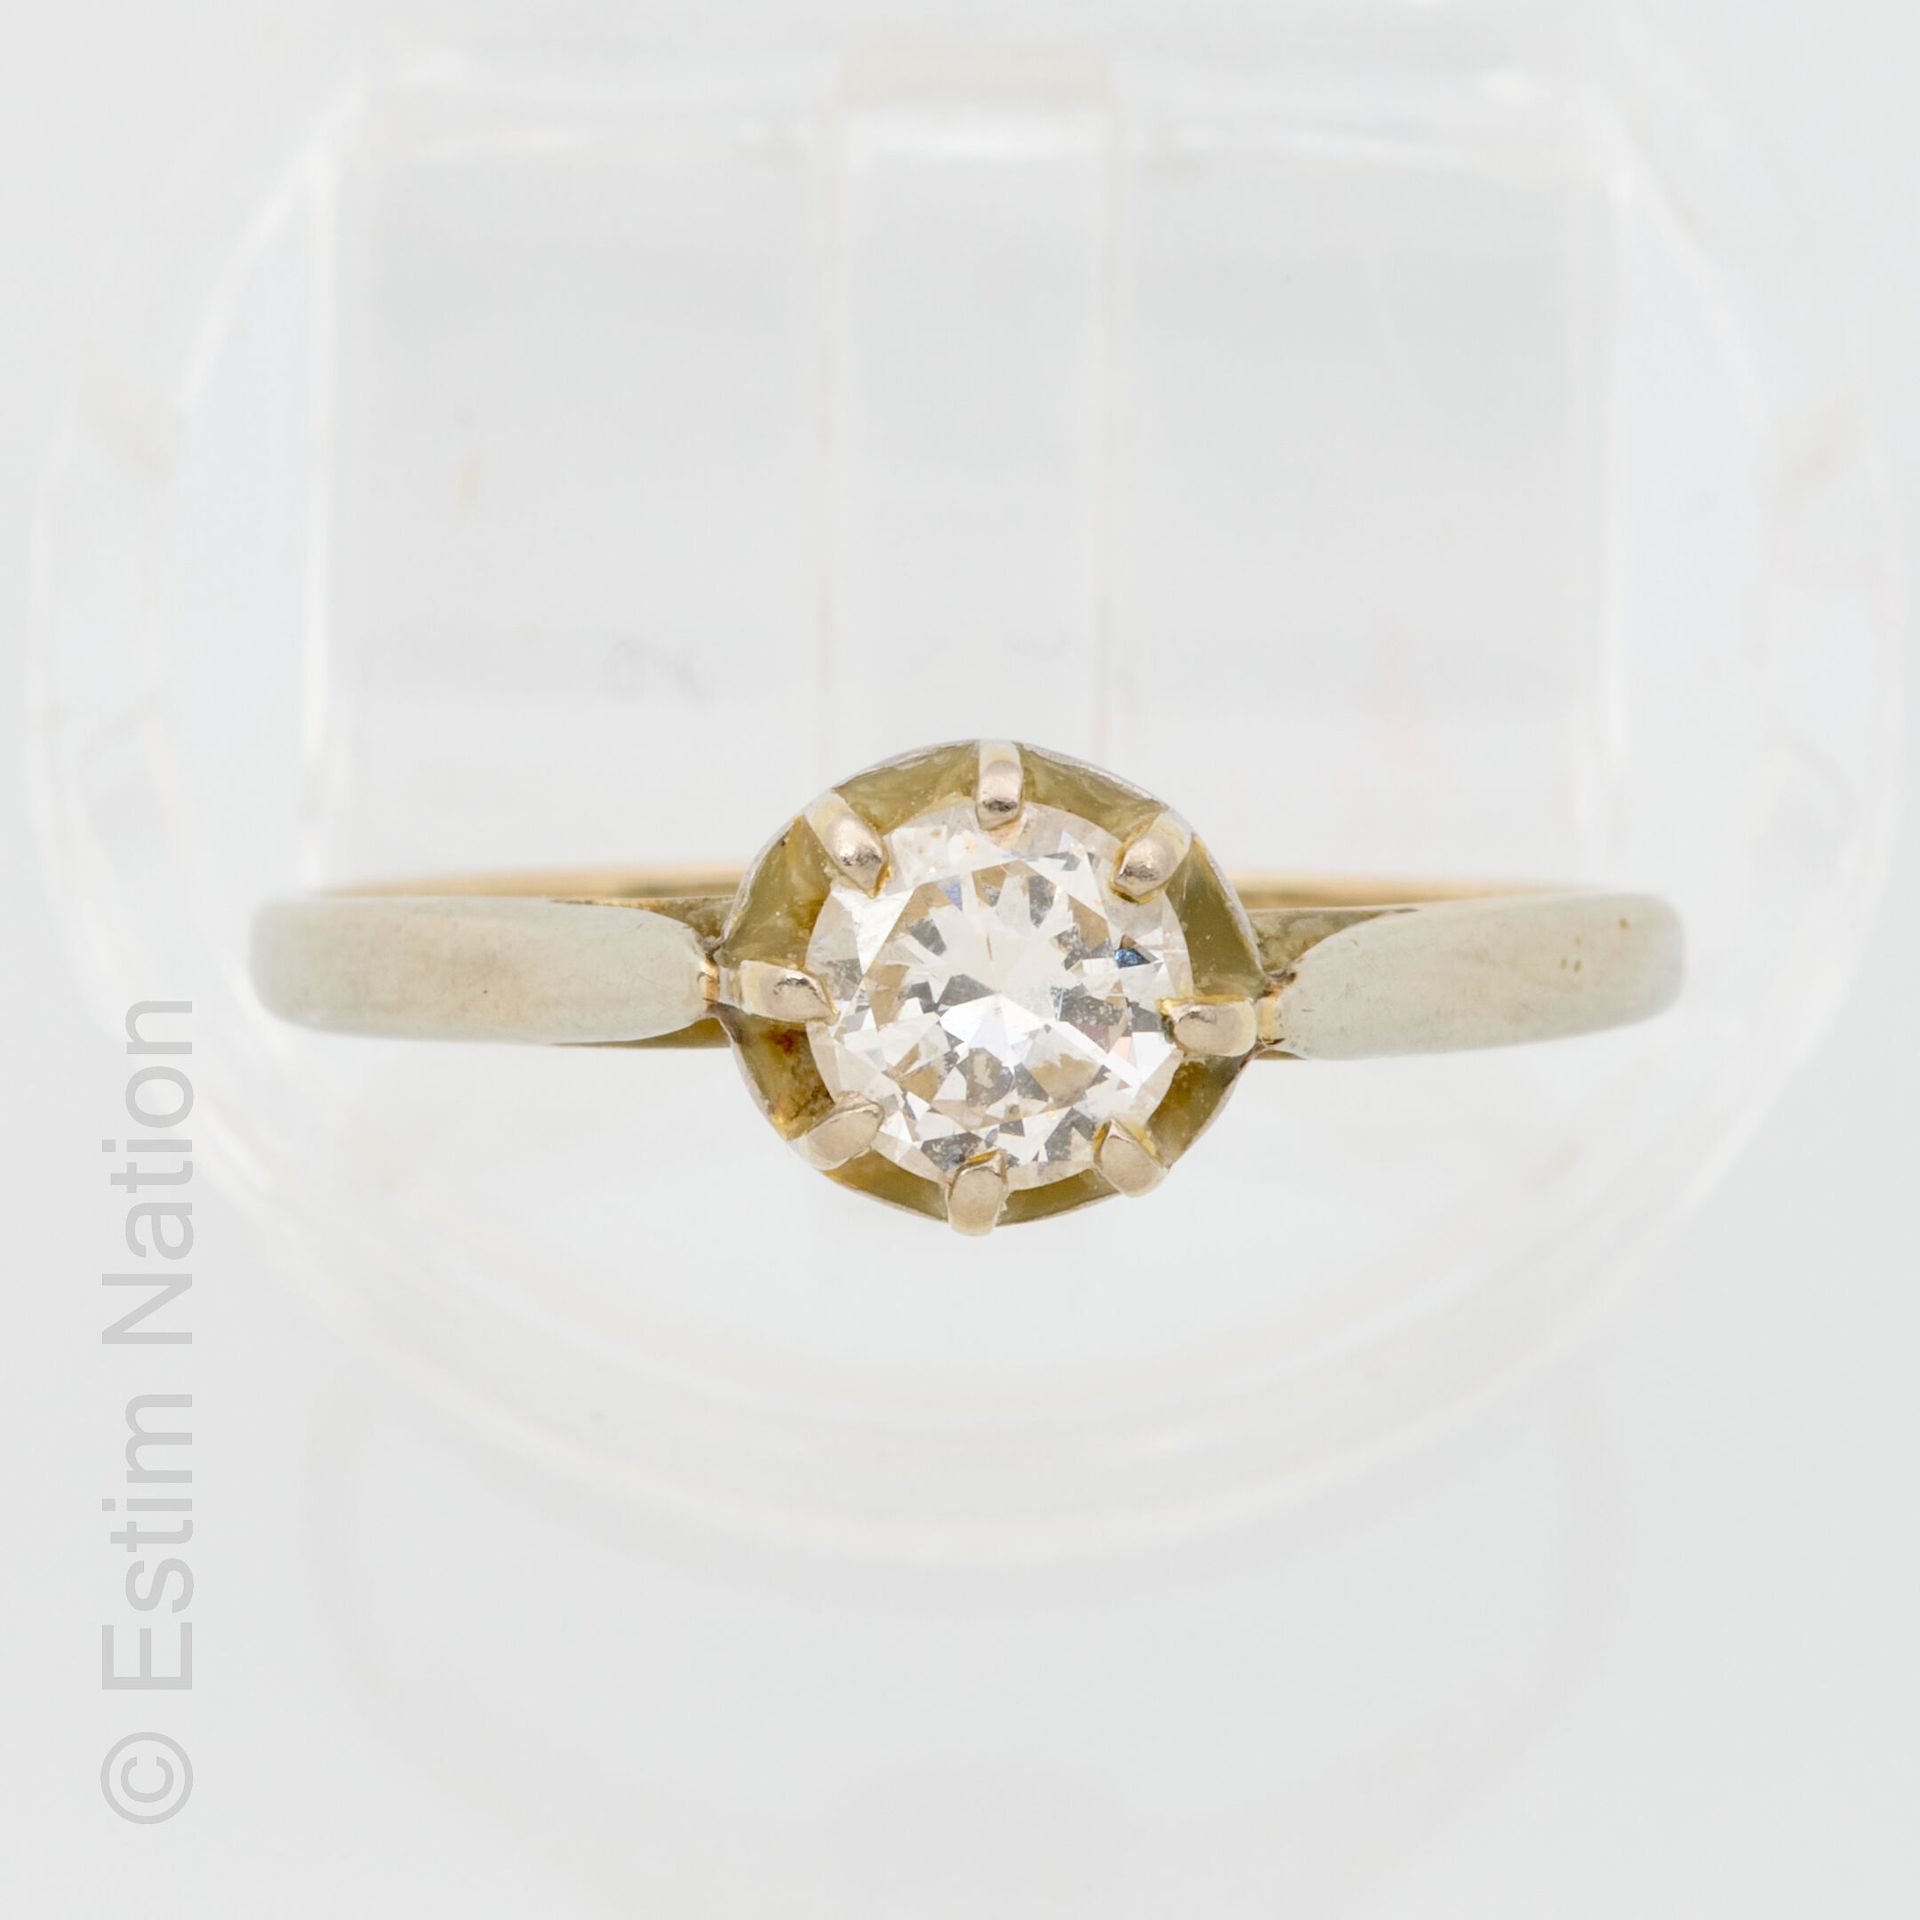 BAGUE OR DIAMANT Ring in white gold 18K (750 thousandths), decorated with a bril&hellip;